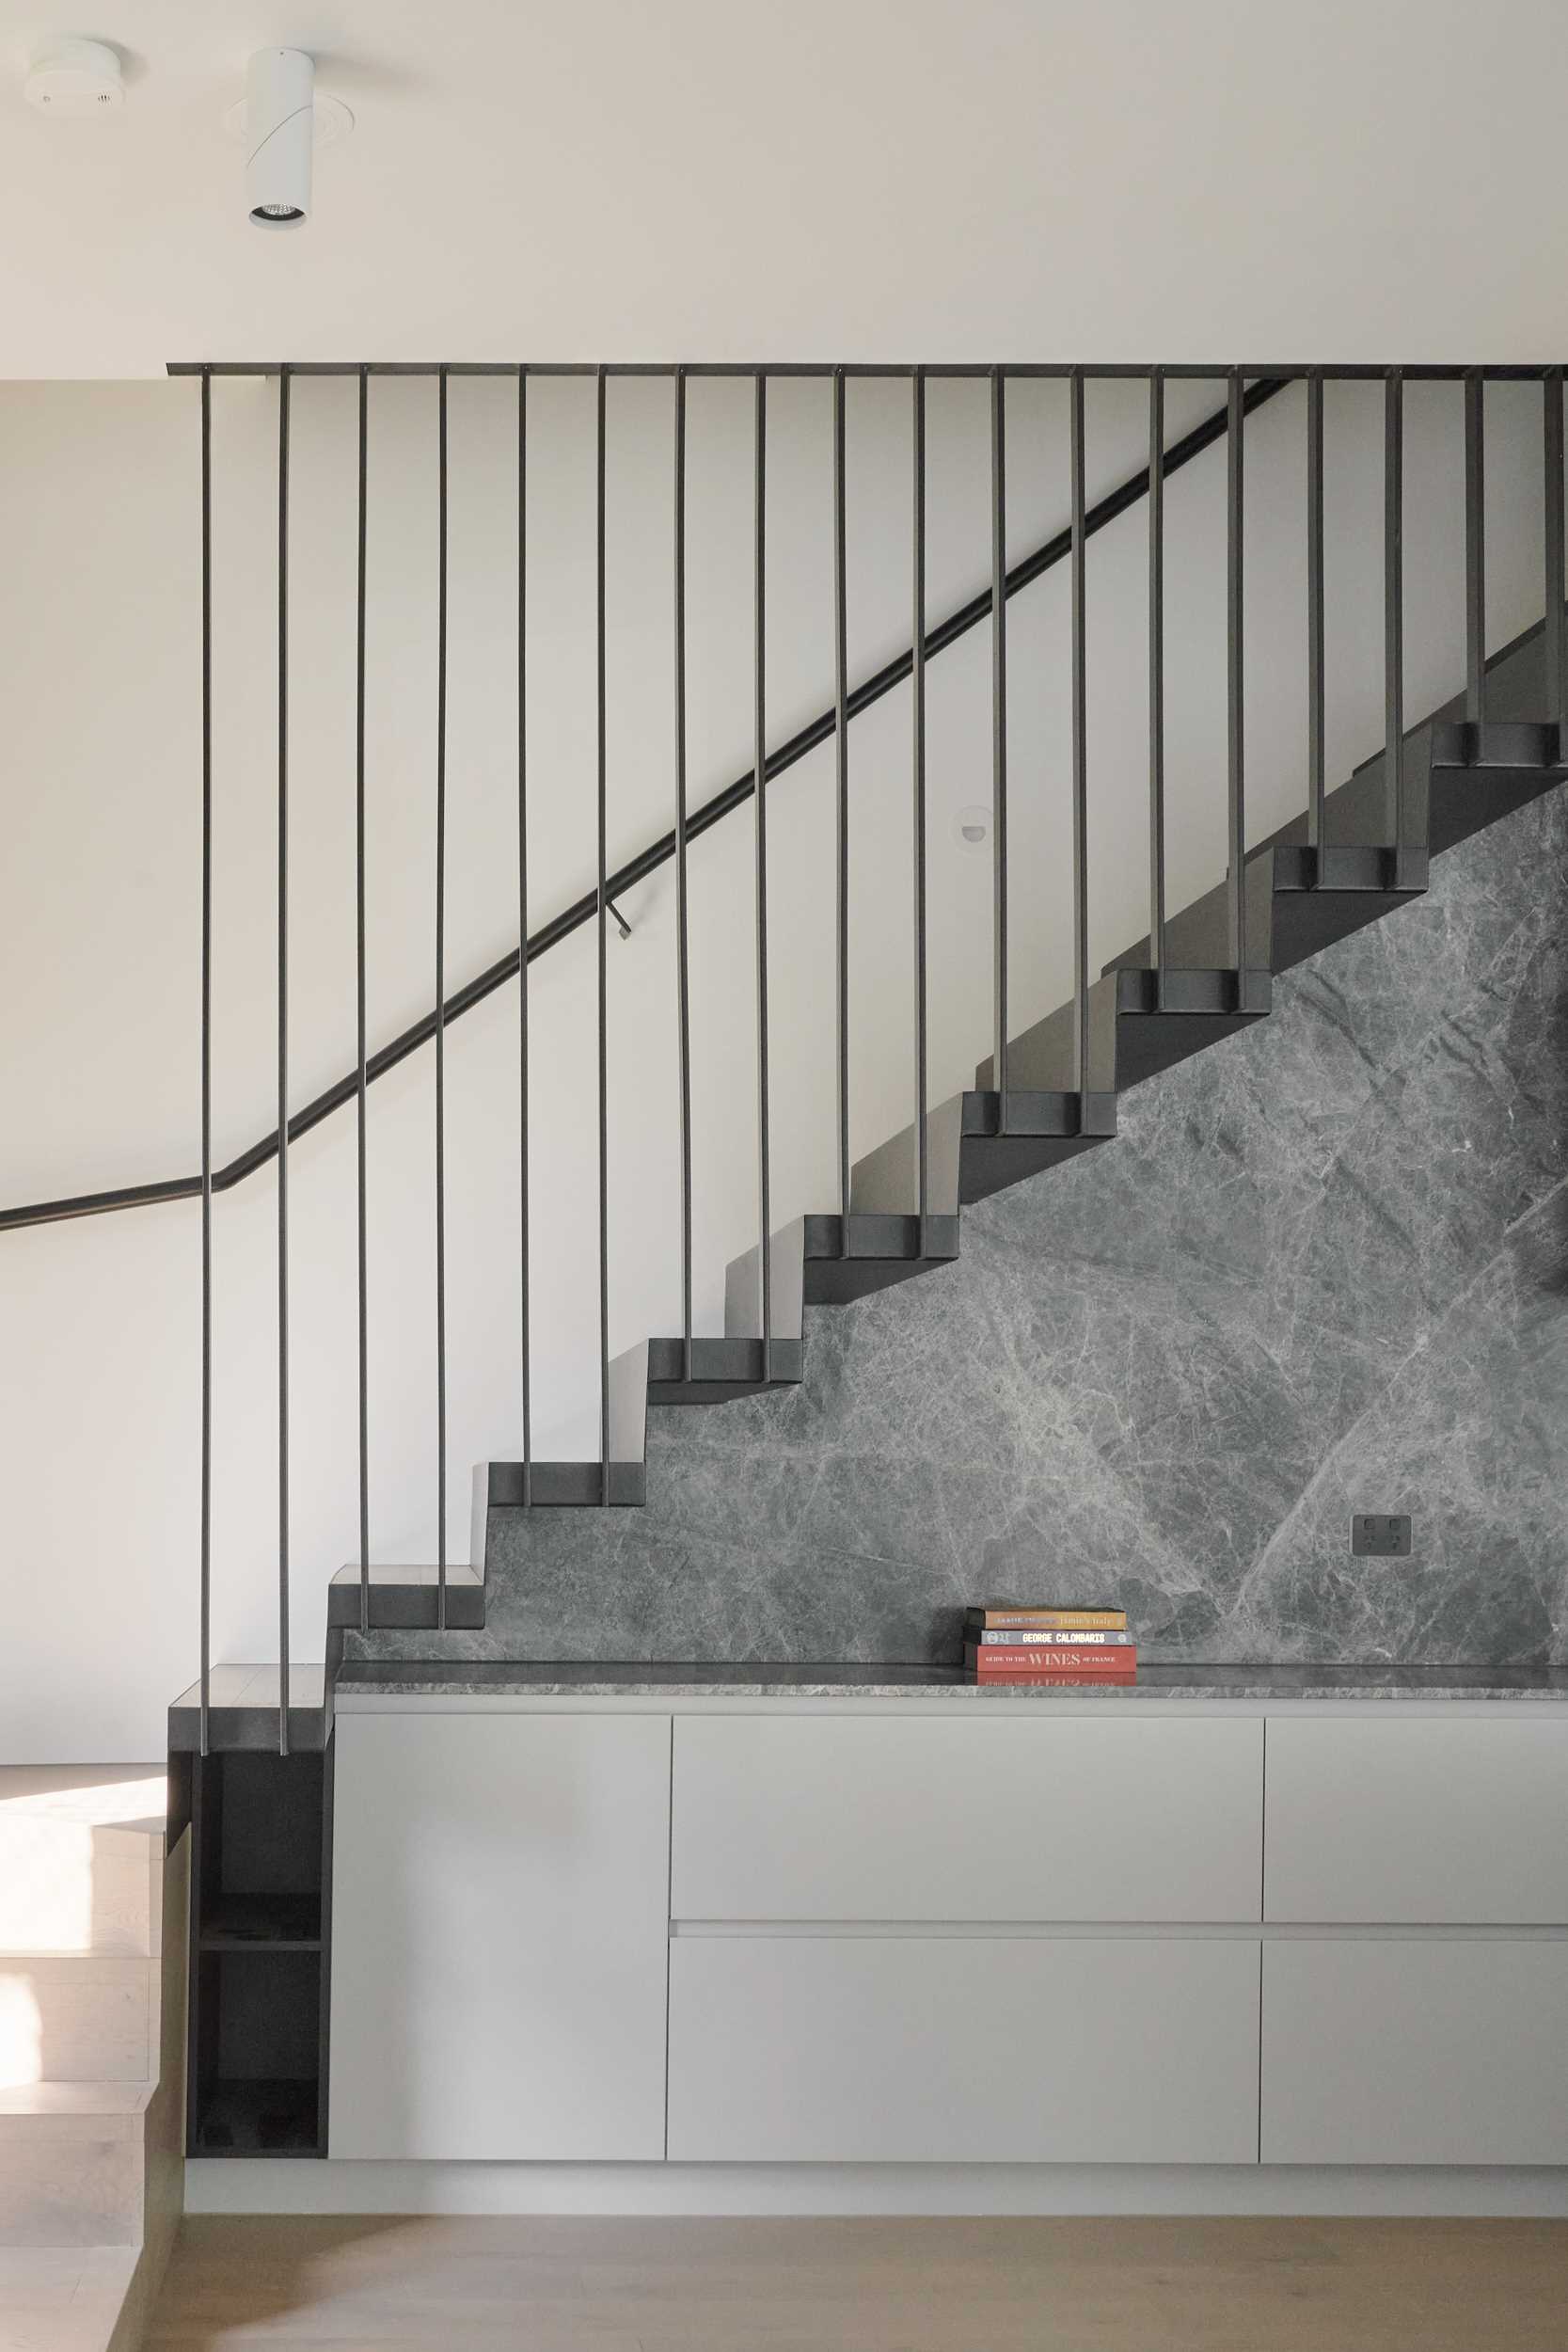 Dark colored stairs with matching handrail connects the various levels of this modern townhome, and provides a contrasting element to the neutral interior.